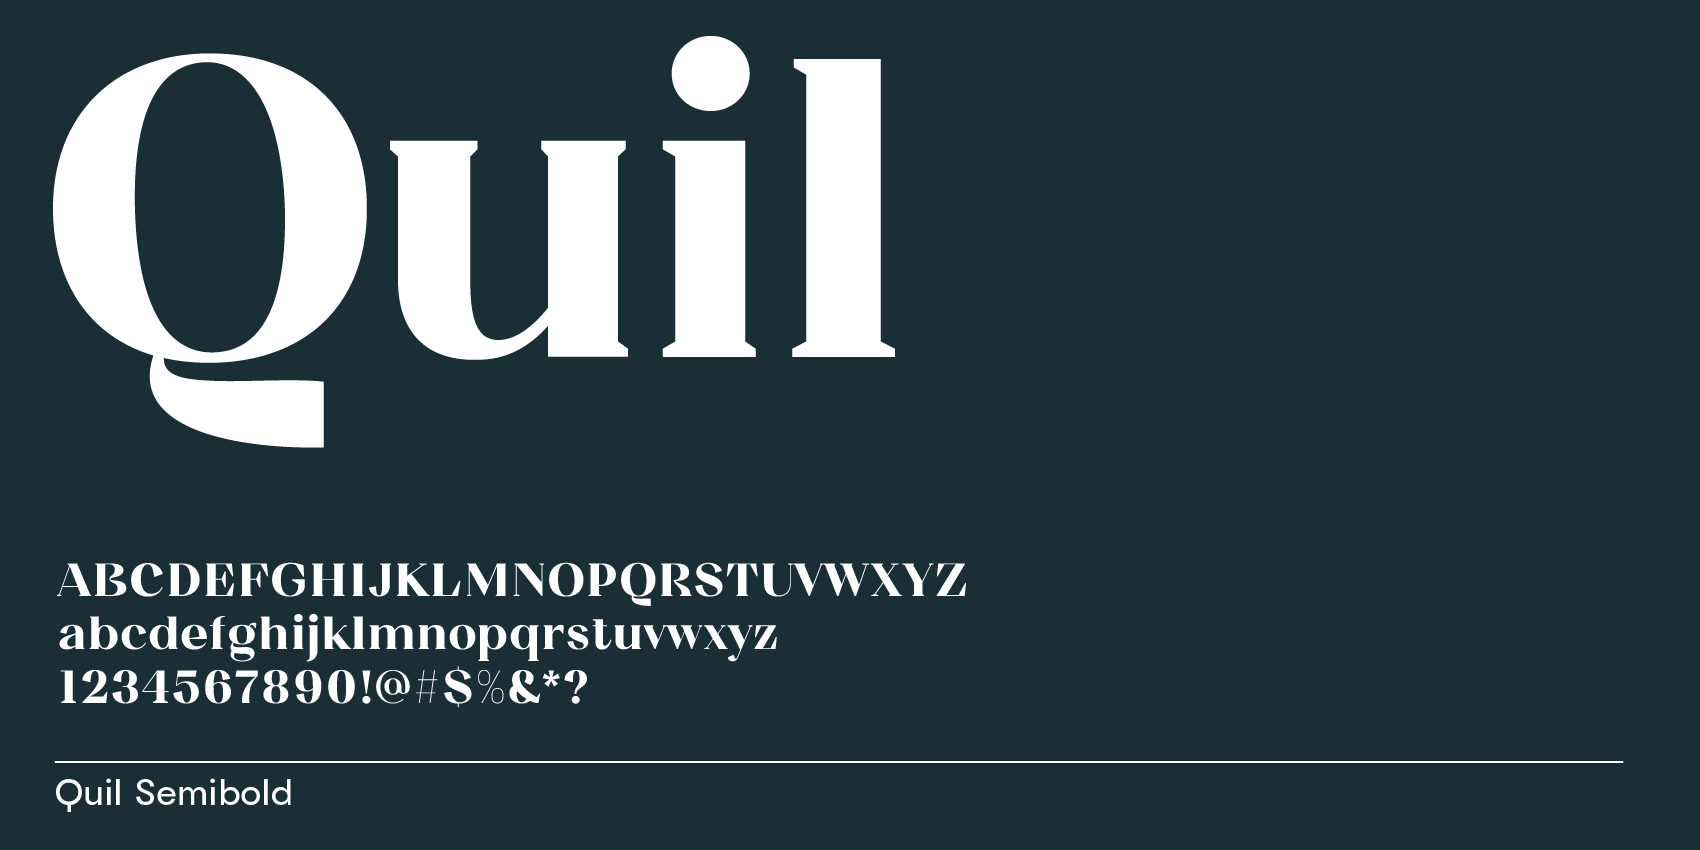 Quil, cool serif font with rounded shapes